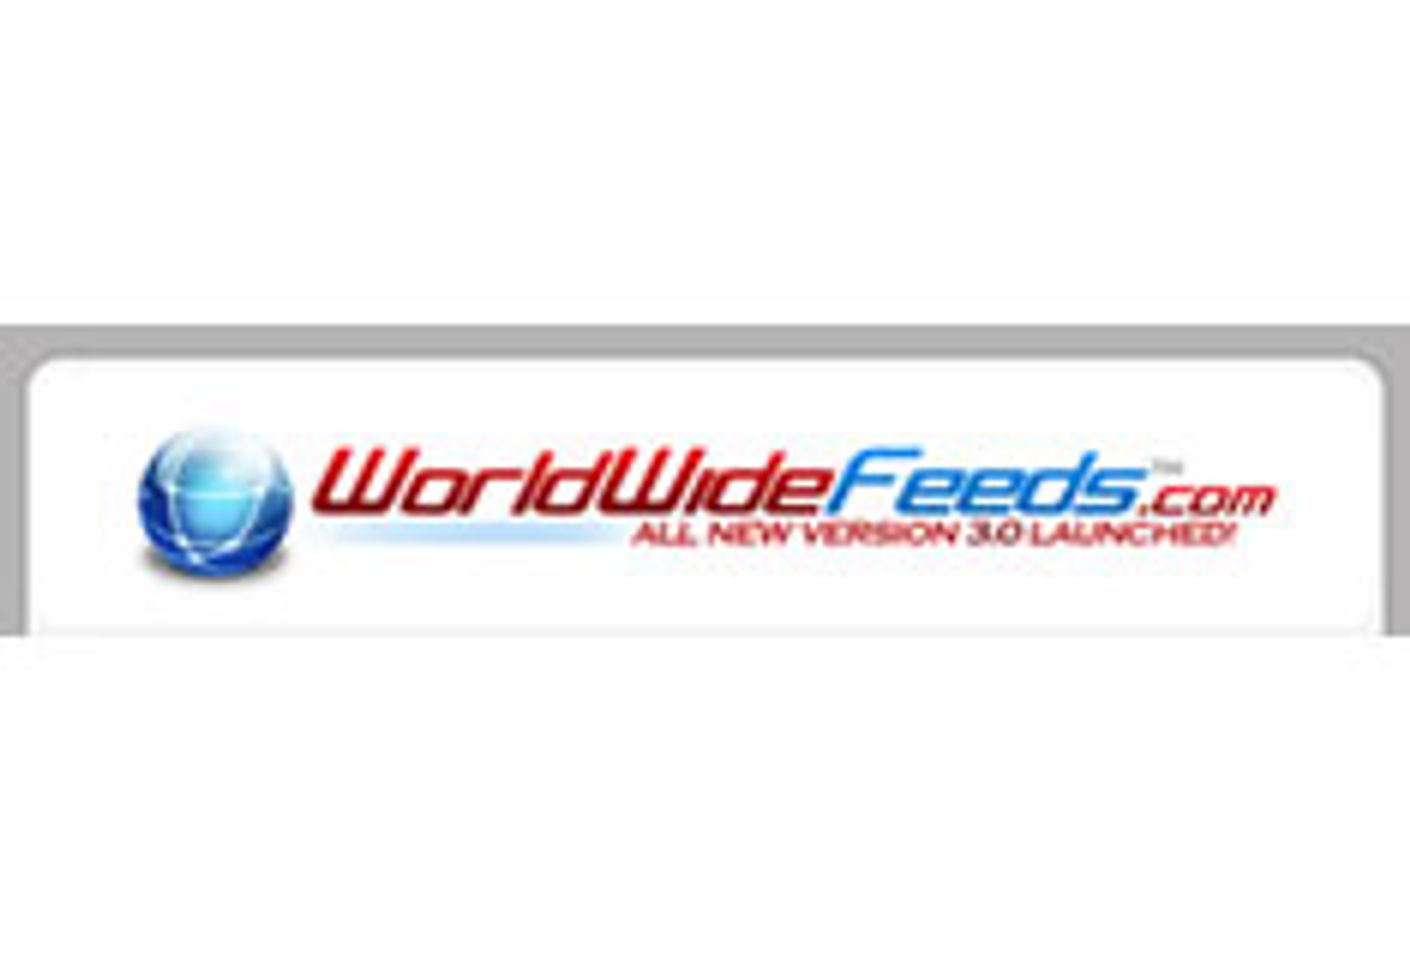 World Wide Feeds, Michael Ancher Launch Glamour Babe Feeds